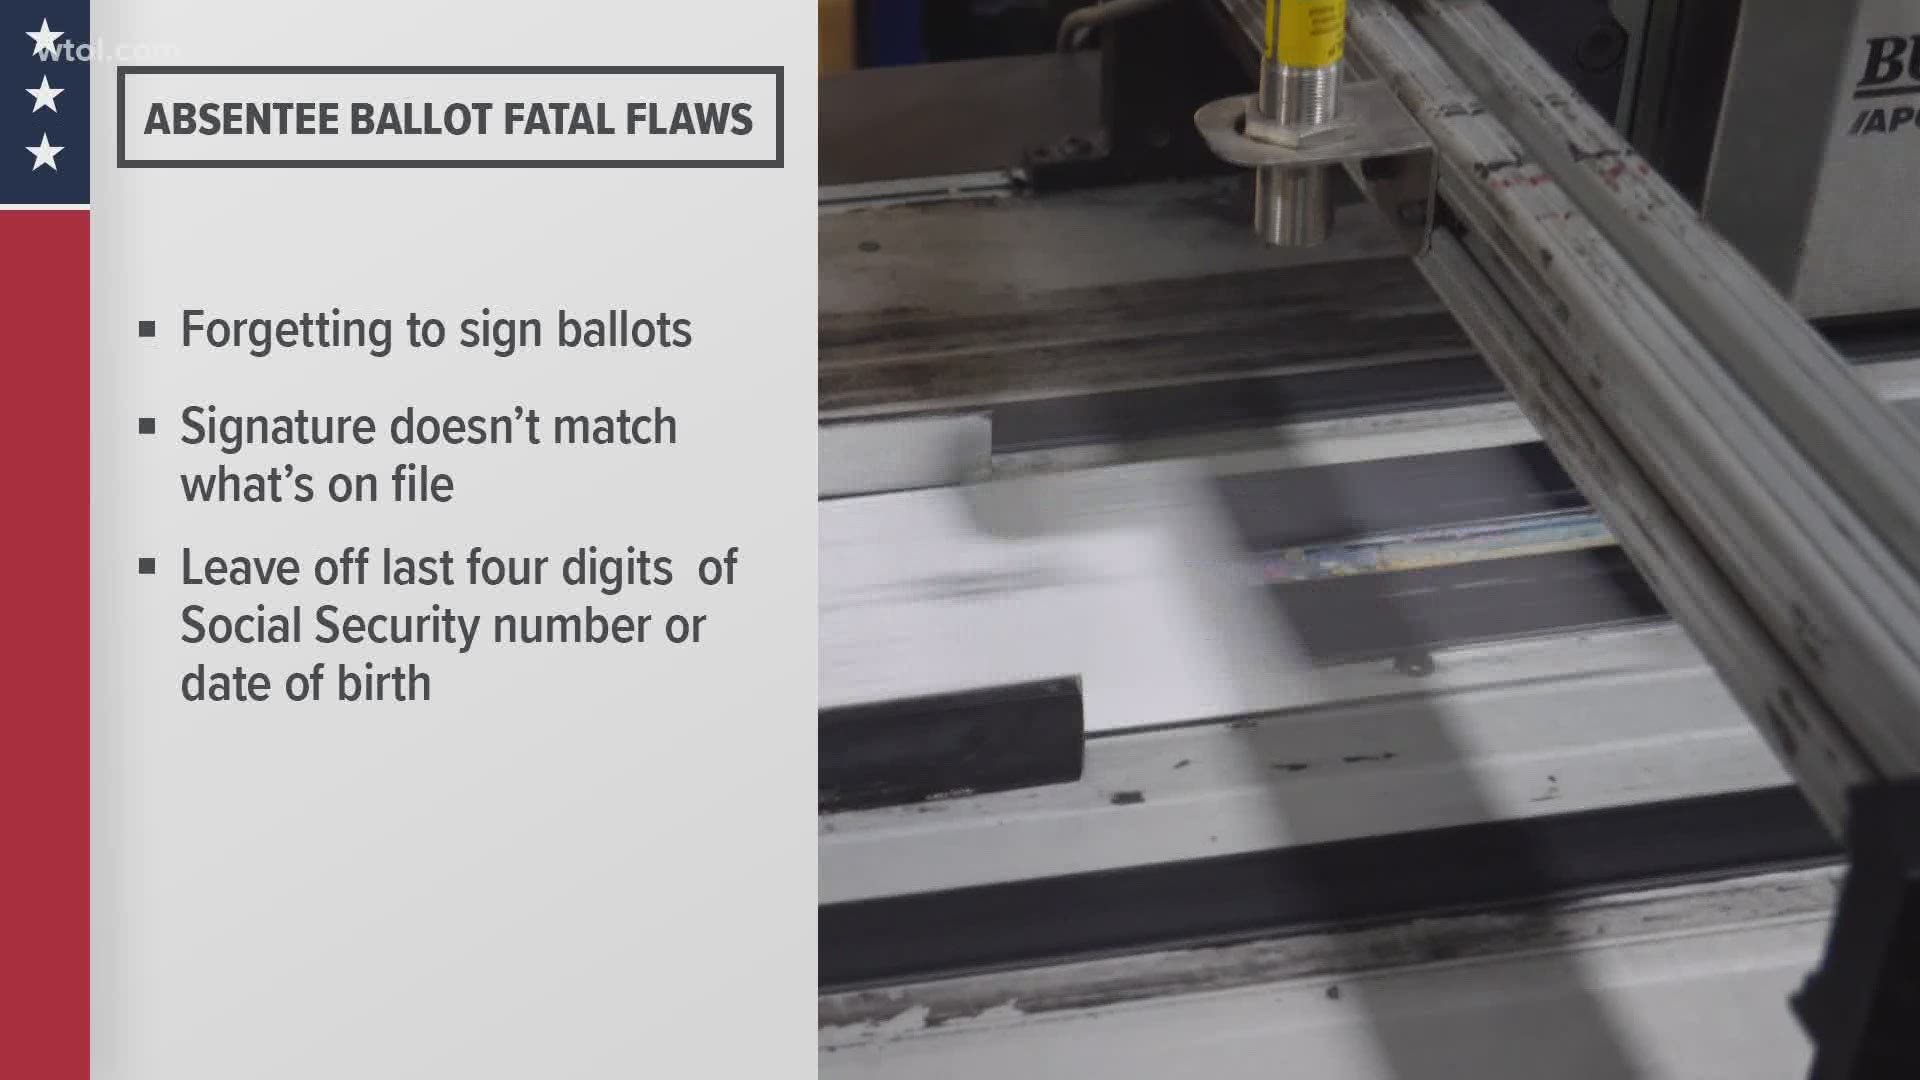 Election officials say many common mistakes can be avoided if voters take their time to fill out ballots completely and correctly.